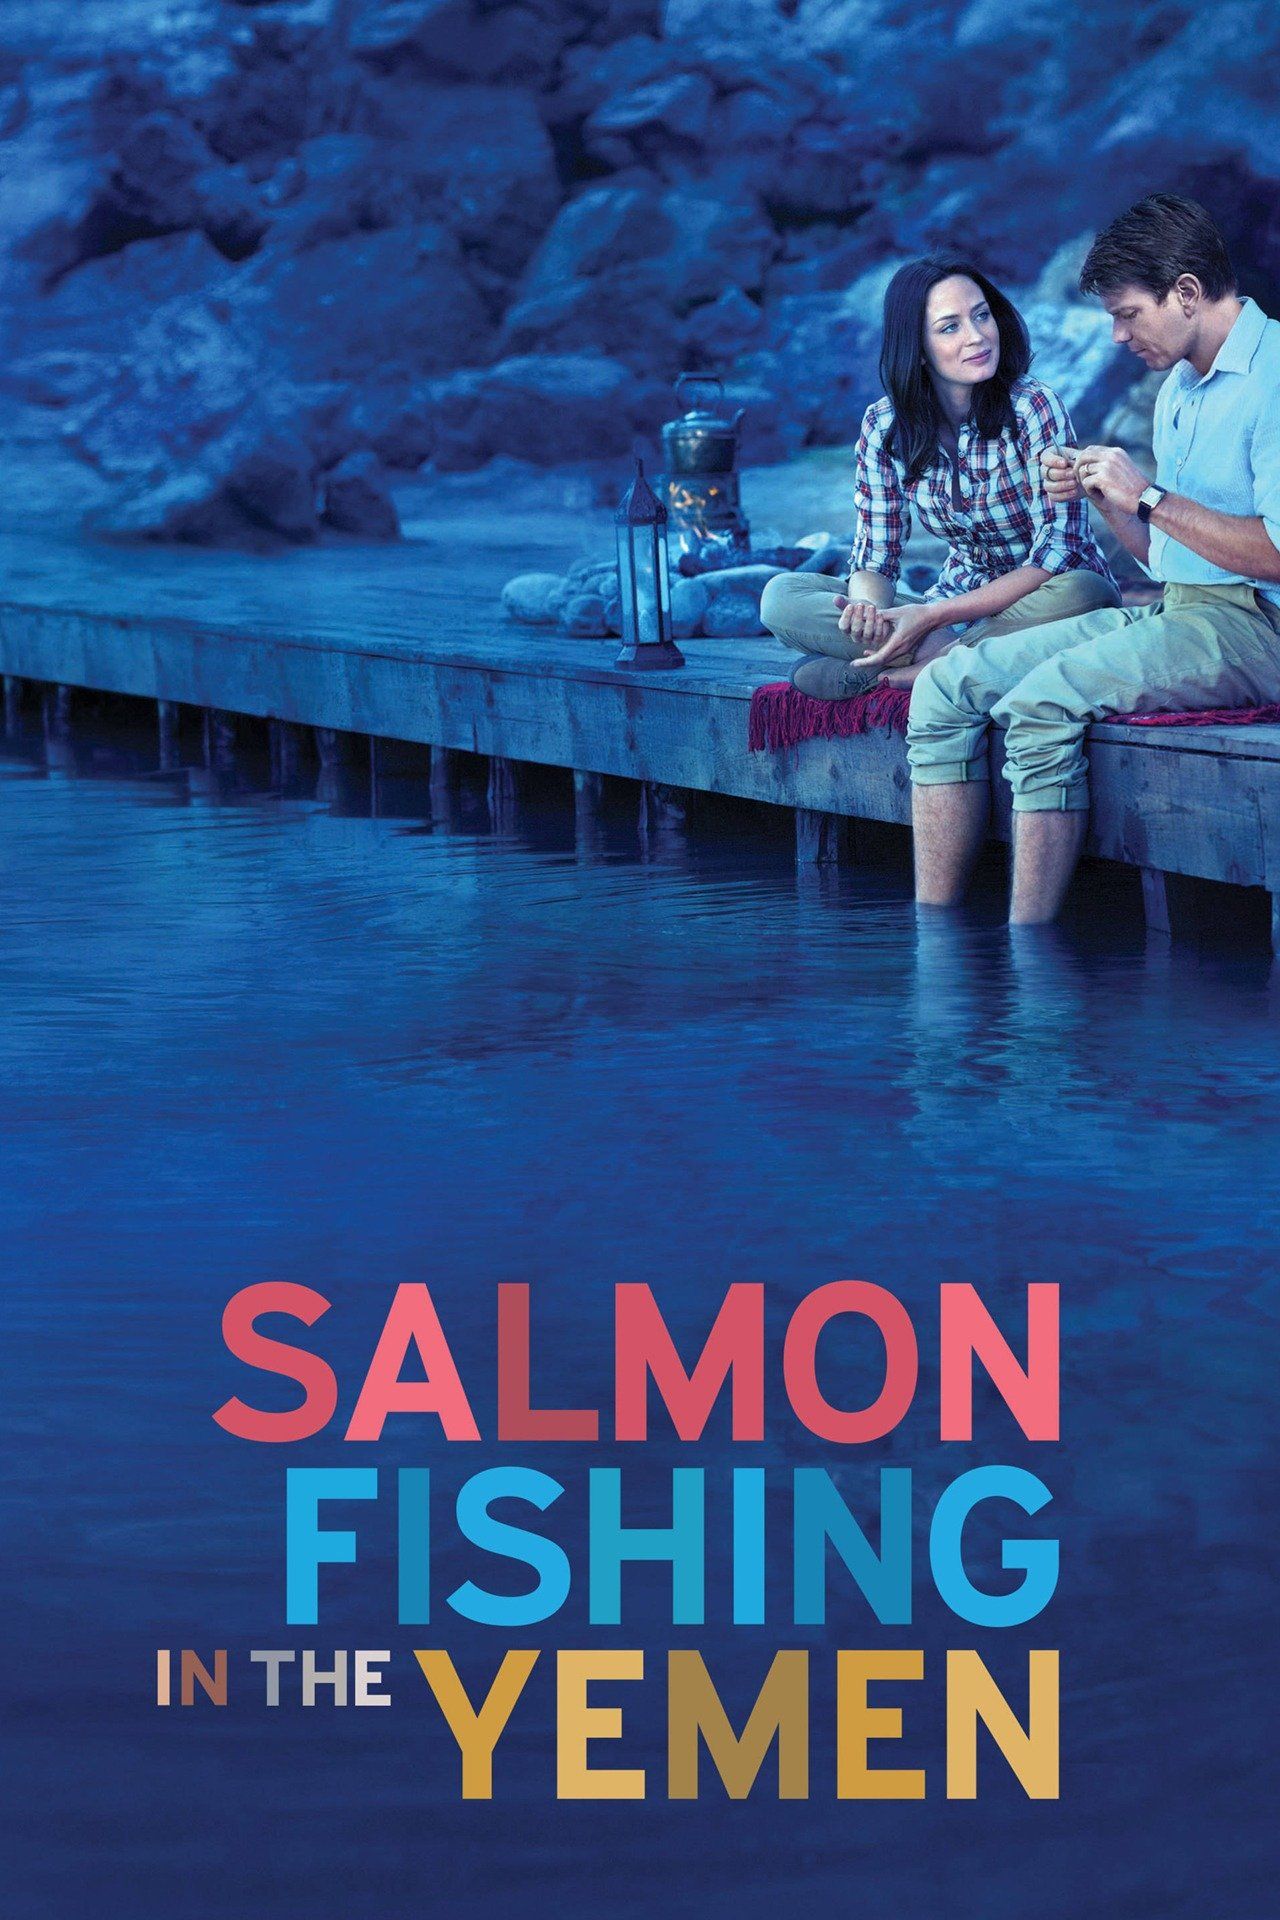 Salmon Fishing in the Yemen  Le Cinema Paradiso Blu-Ray reviews and DVD  reviews